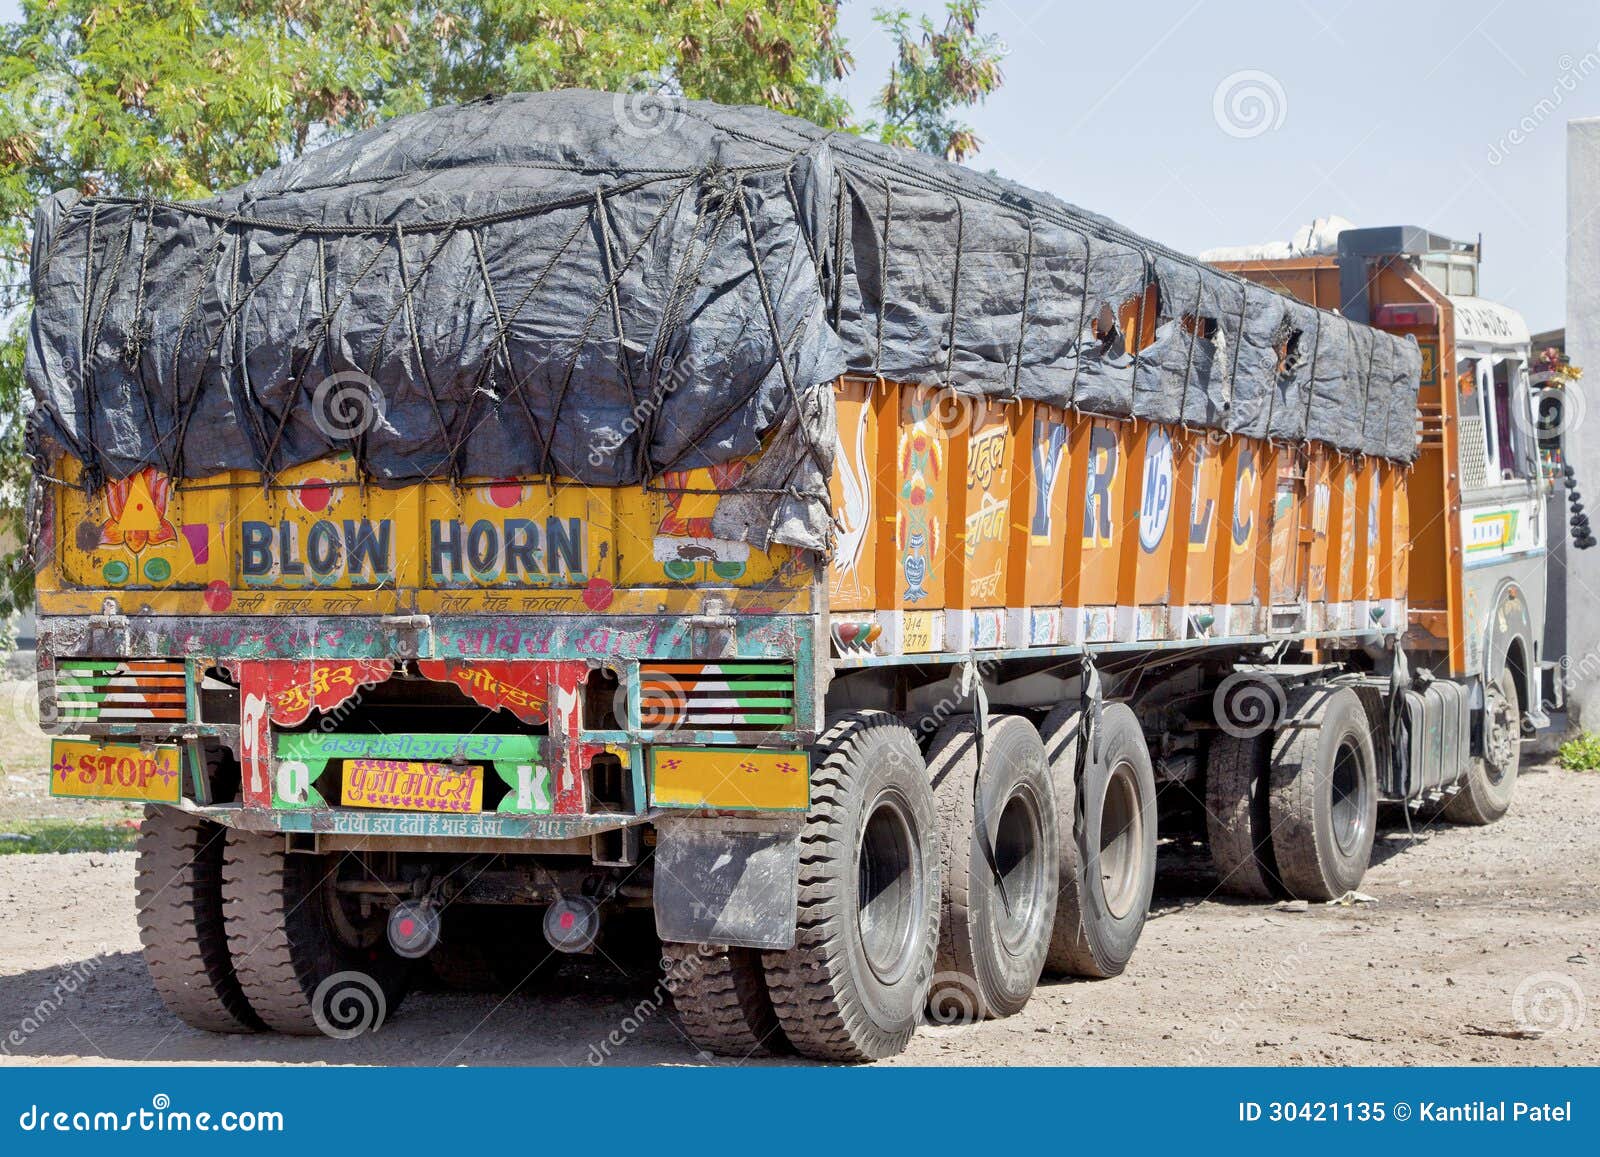 Blow Horn Indian Truck Parked Up Editorial Image  Image: 30421135